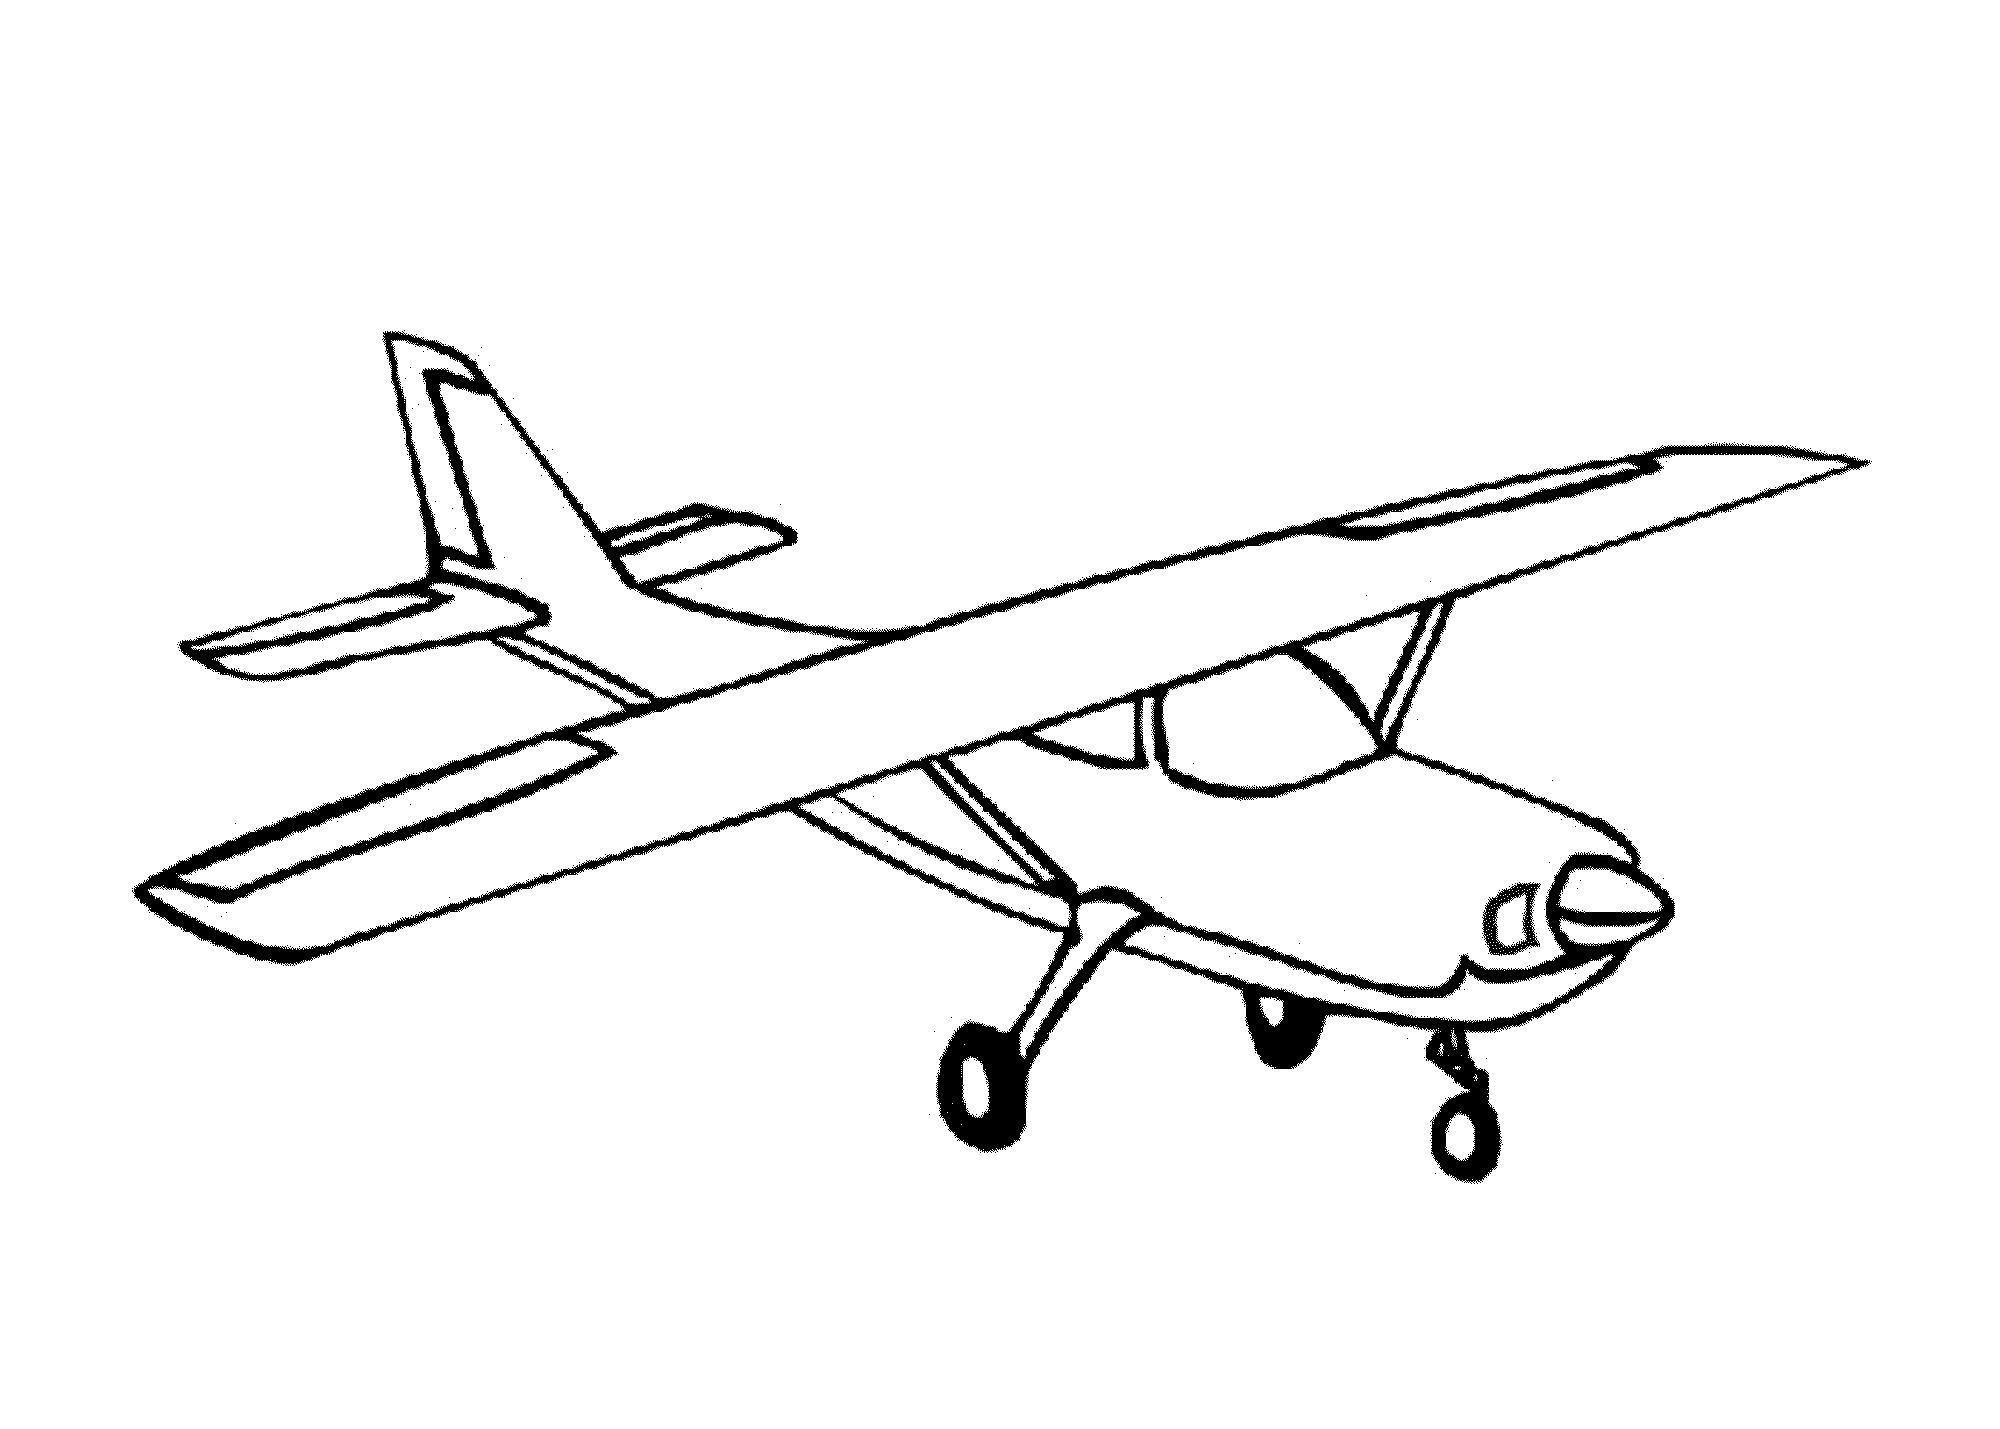 How to draw a simple airplane - bxekiosk